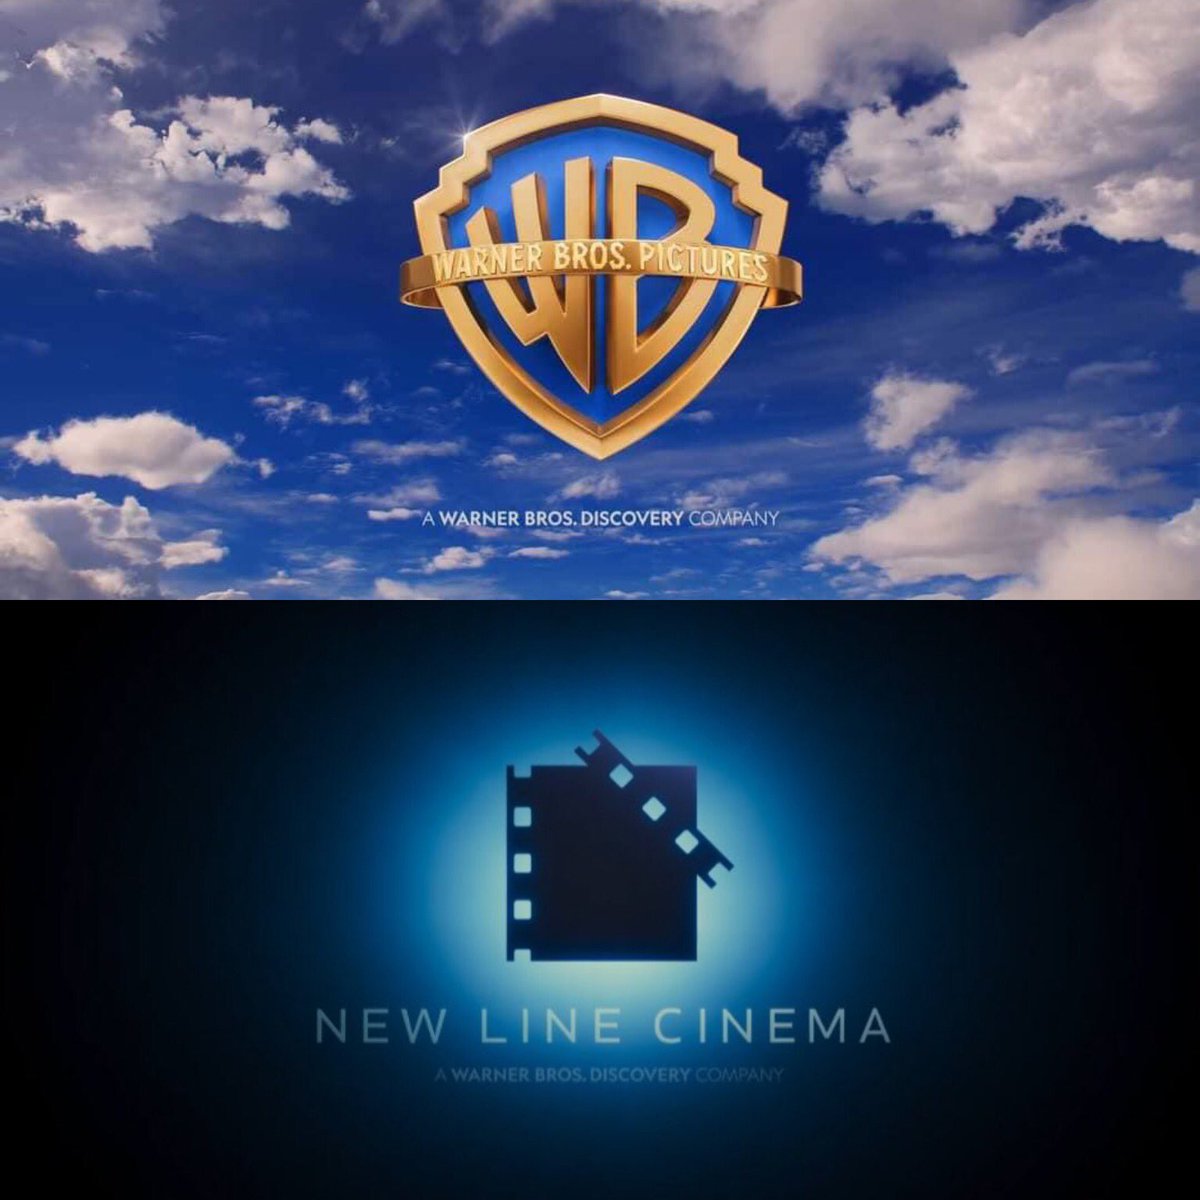 Current @wbpictures and @newlinecinema logos 🎥